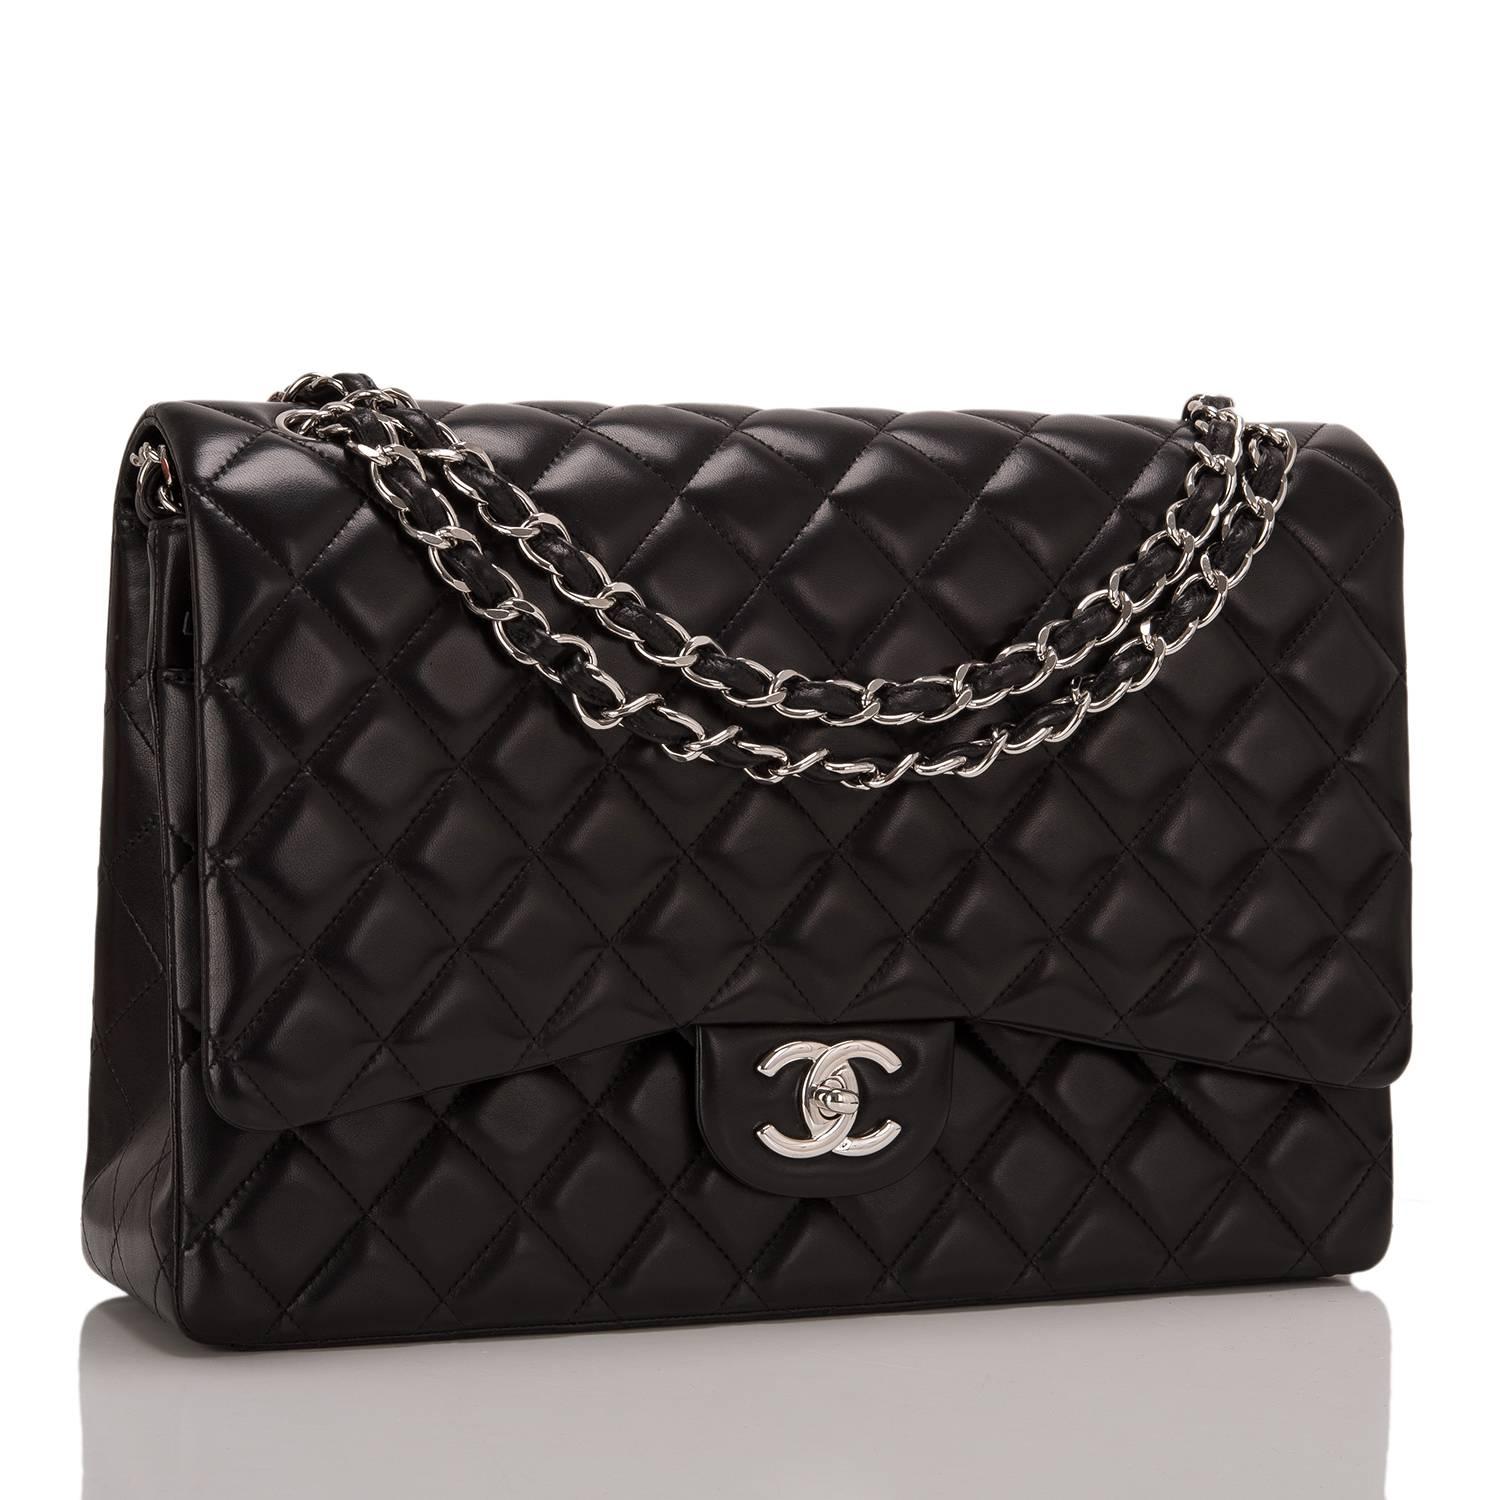 This Chanel Maxi Classic double flap bag is made of black lambskin leather and accented with silver tone hardware. The bag features a front flap with signature CC turnlock closure, a half moon back pocket, and an adjustable interwoven silver tone